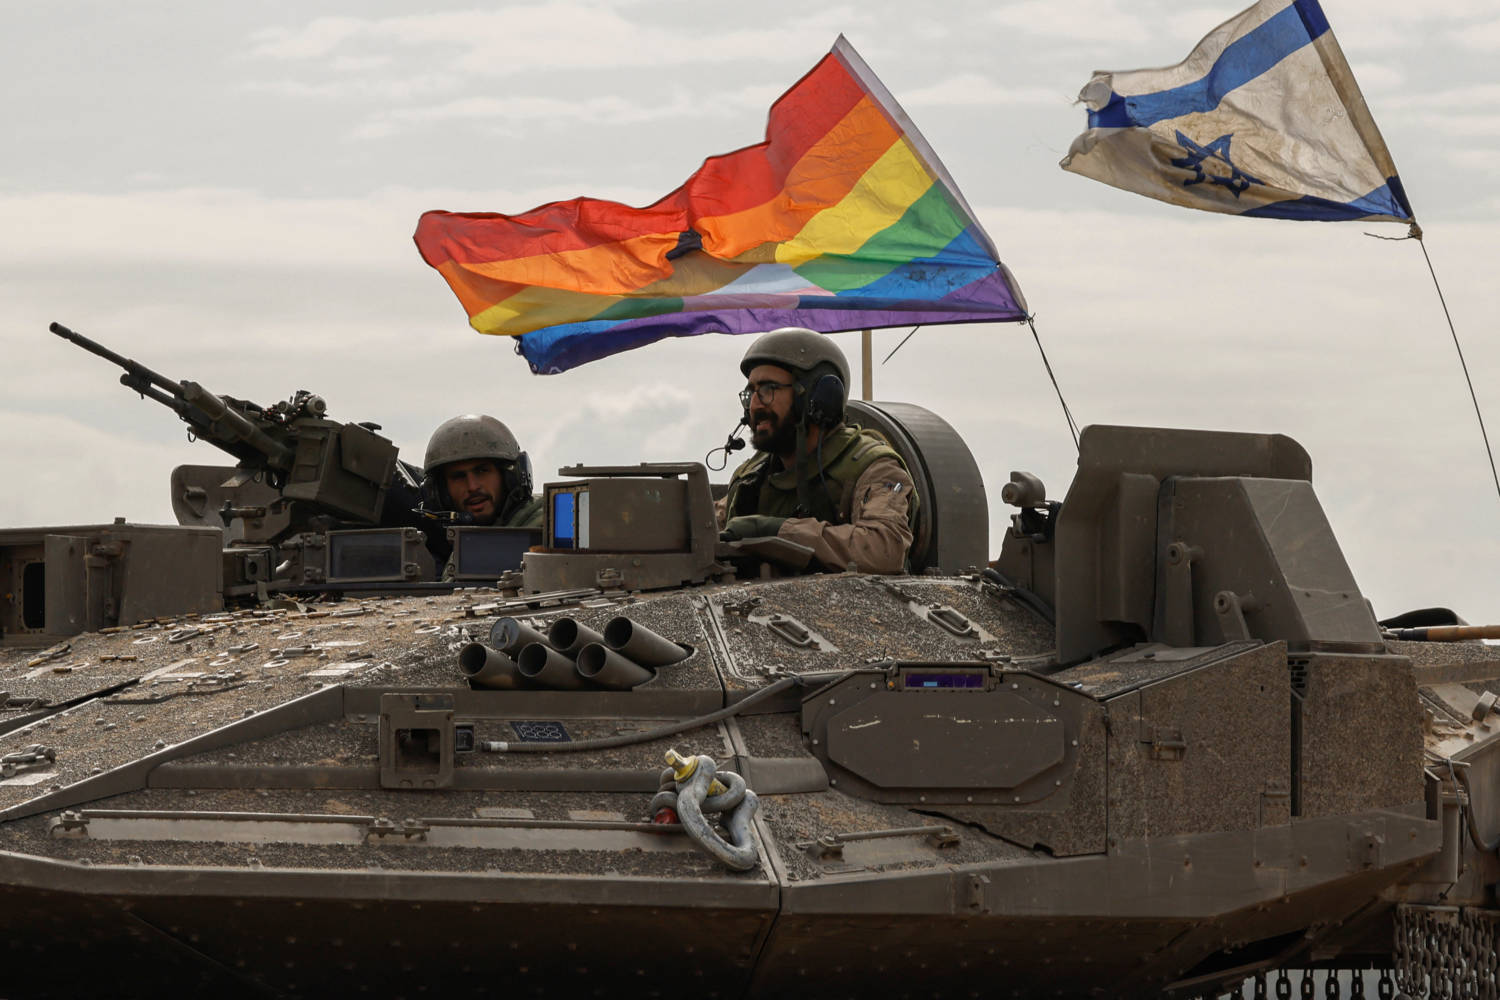 An Israeli Apc With A Rainbow Flag With A Star Of David And An Israeli National Flag Re Enters Israel from gaza, Near The Israel Gaza Border, In Southern Israel